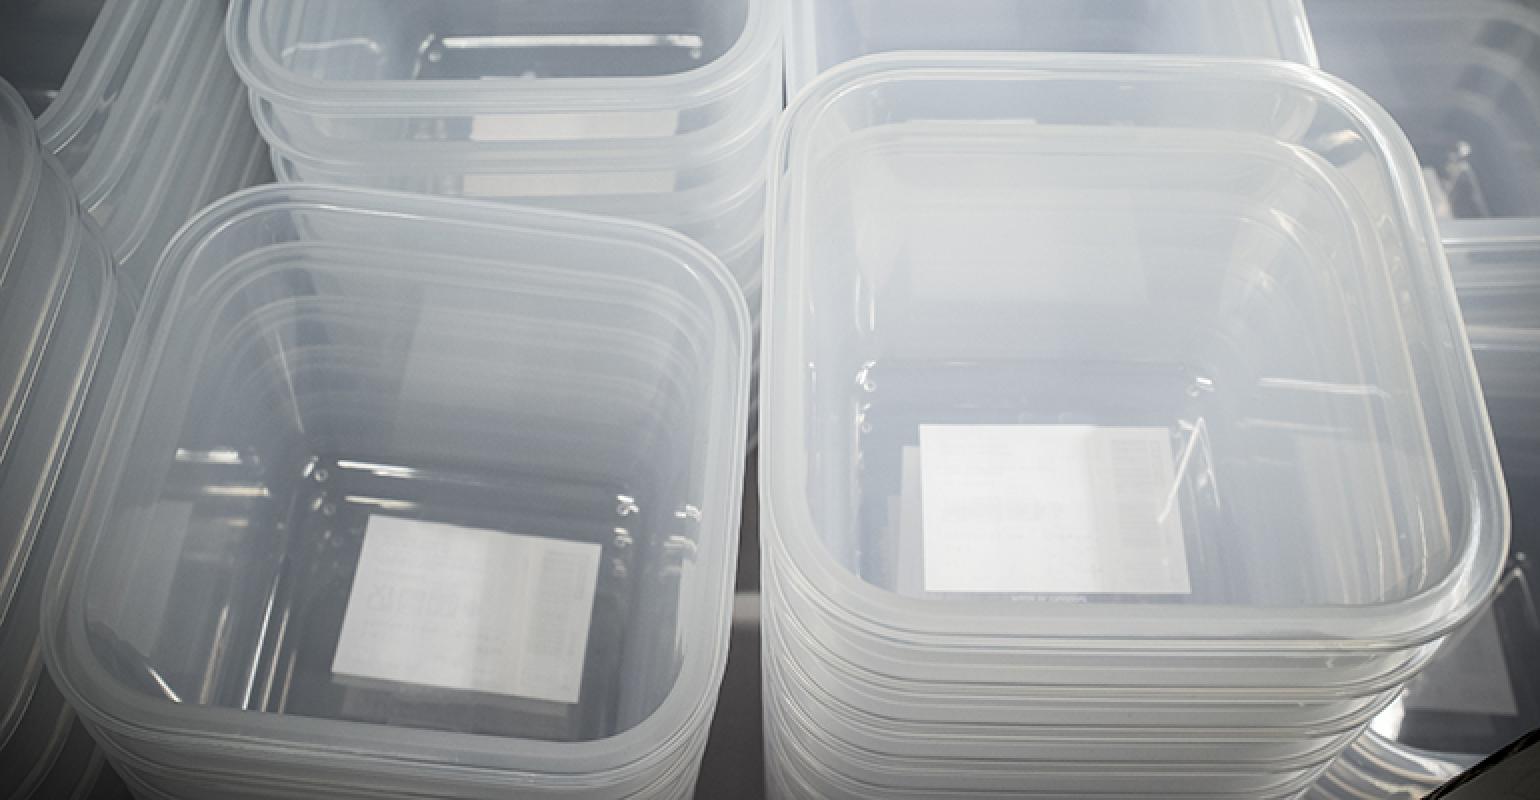 Plastic Food Containers For Restaurants